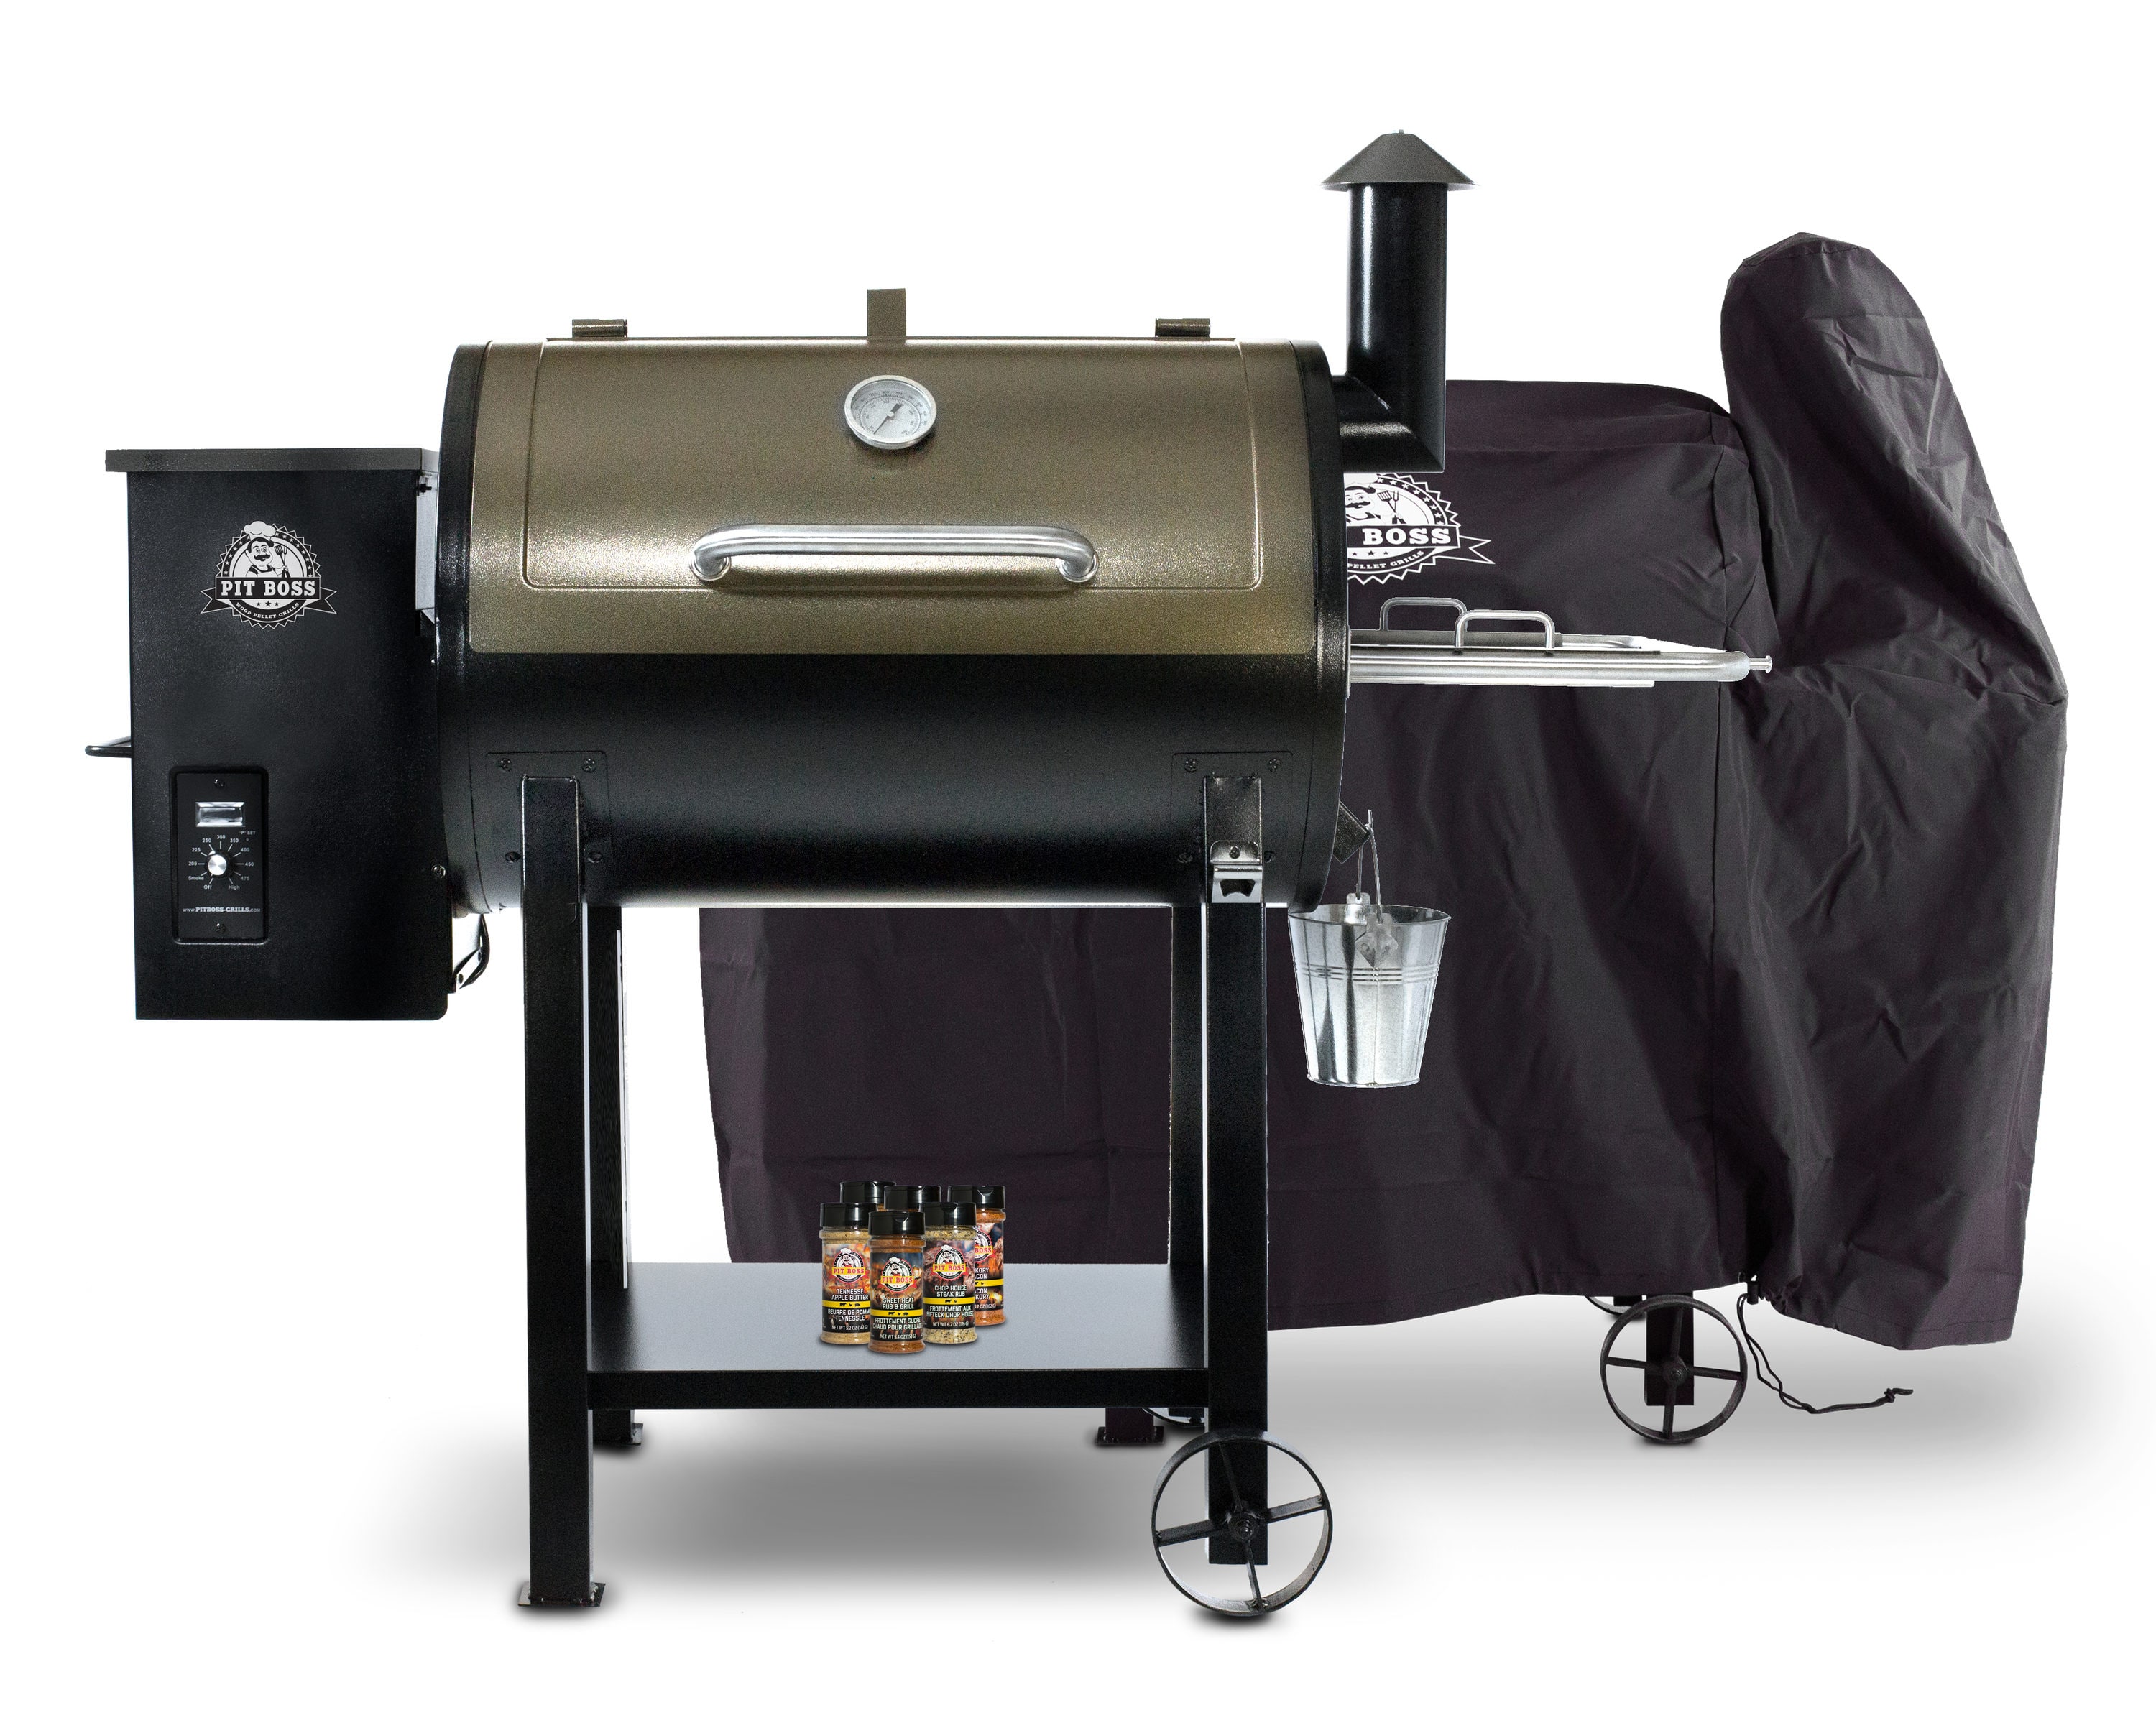 Pit Boss 456 sq in Wood Pellet Grill and Smoker - Barbecues, Grills &  Smokers - New Orleans, Louisiana, Facebook Marketplace